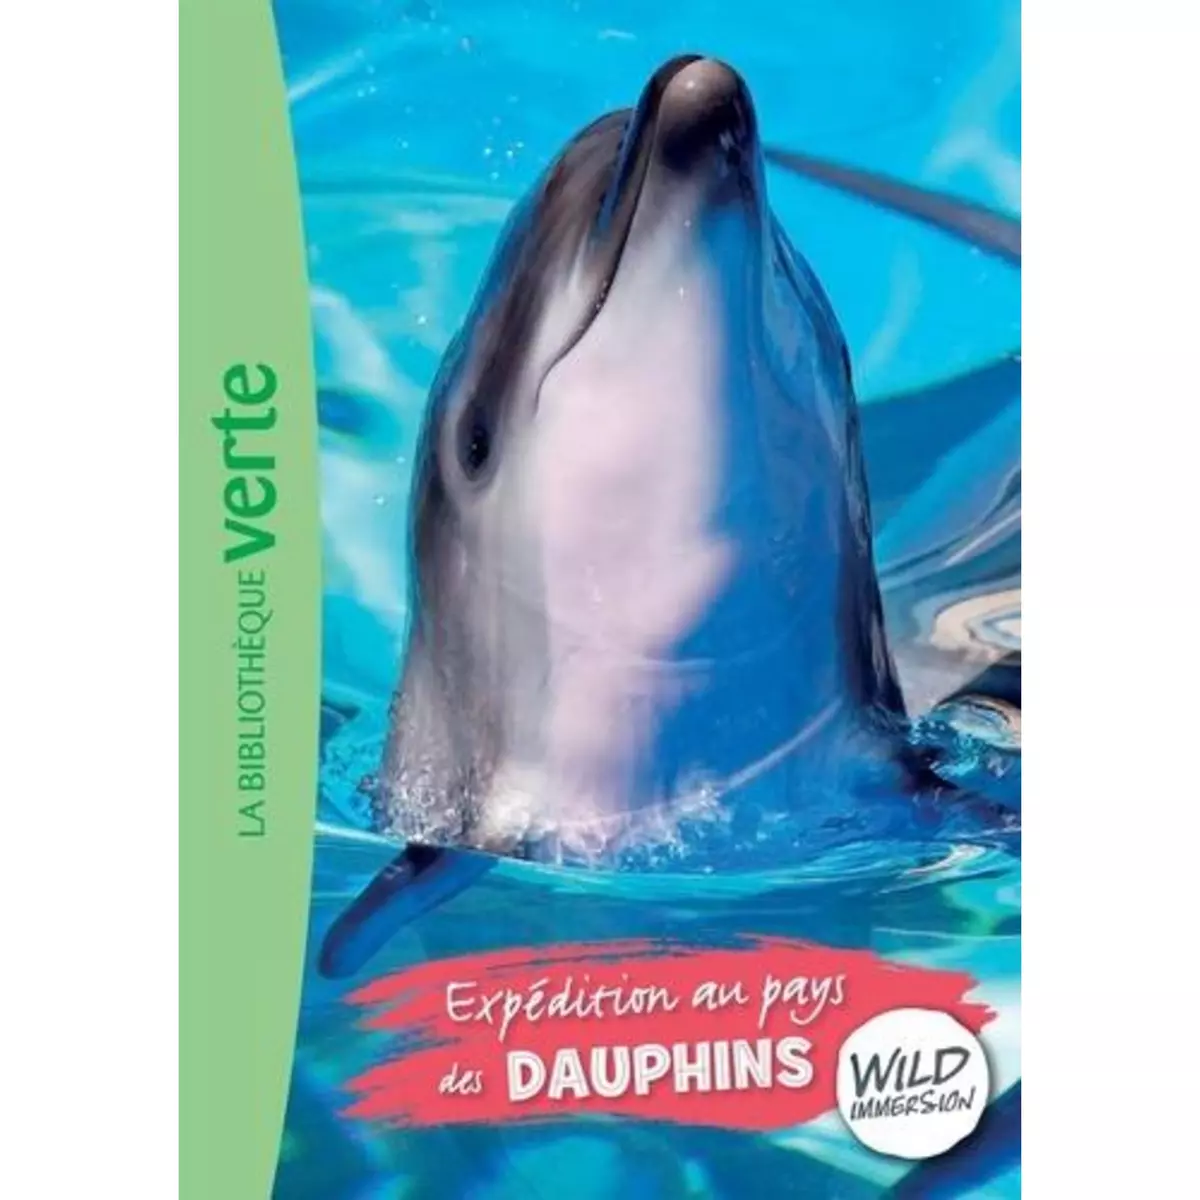  WILD IMMERSION TOME 4 : EXPEDITION AU PAYS DES DAUPHINS, Ruter Pascal